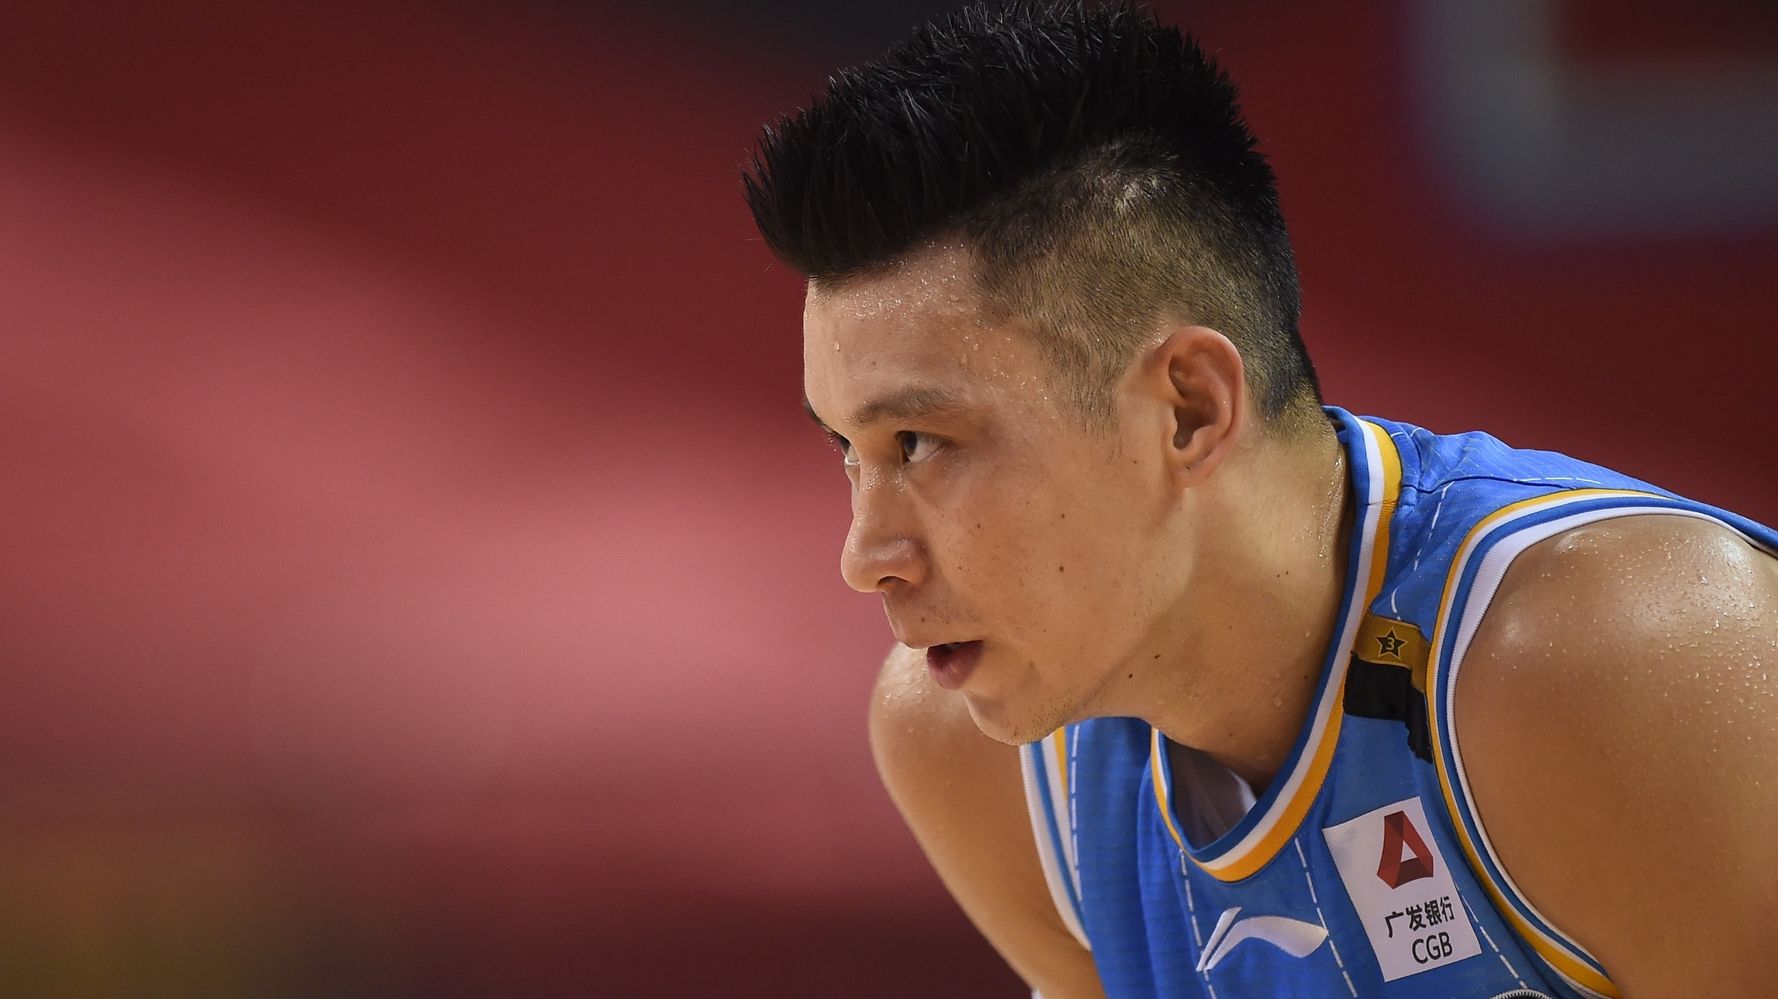 Basketball officials investigating complaint that Jeremy Lin was called ‘Coronavirus’ in court